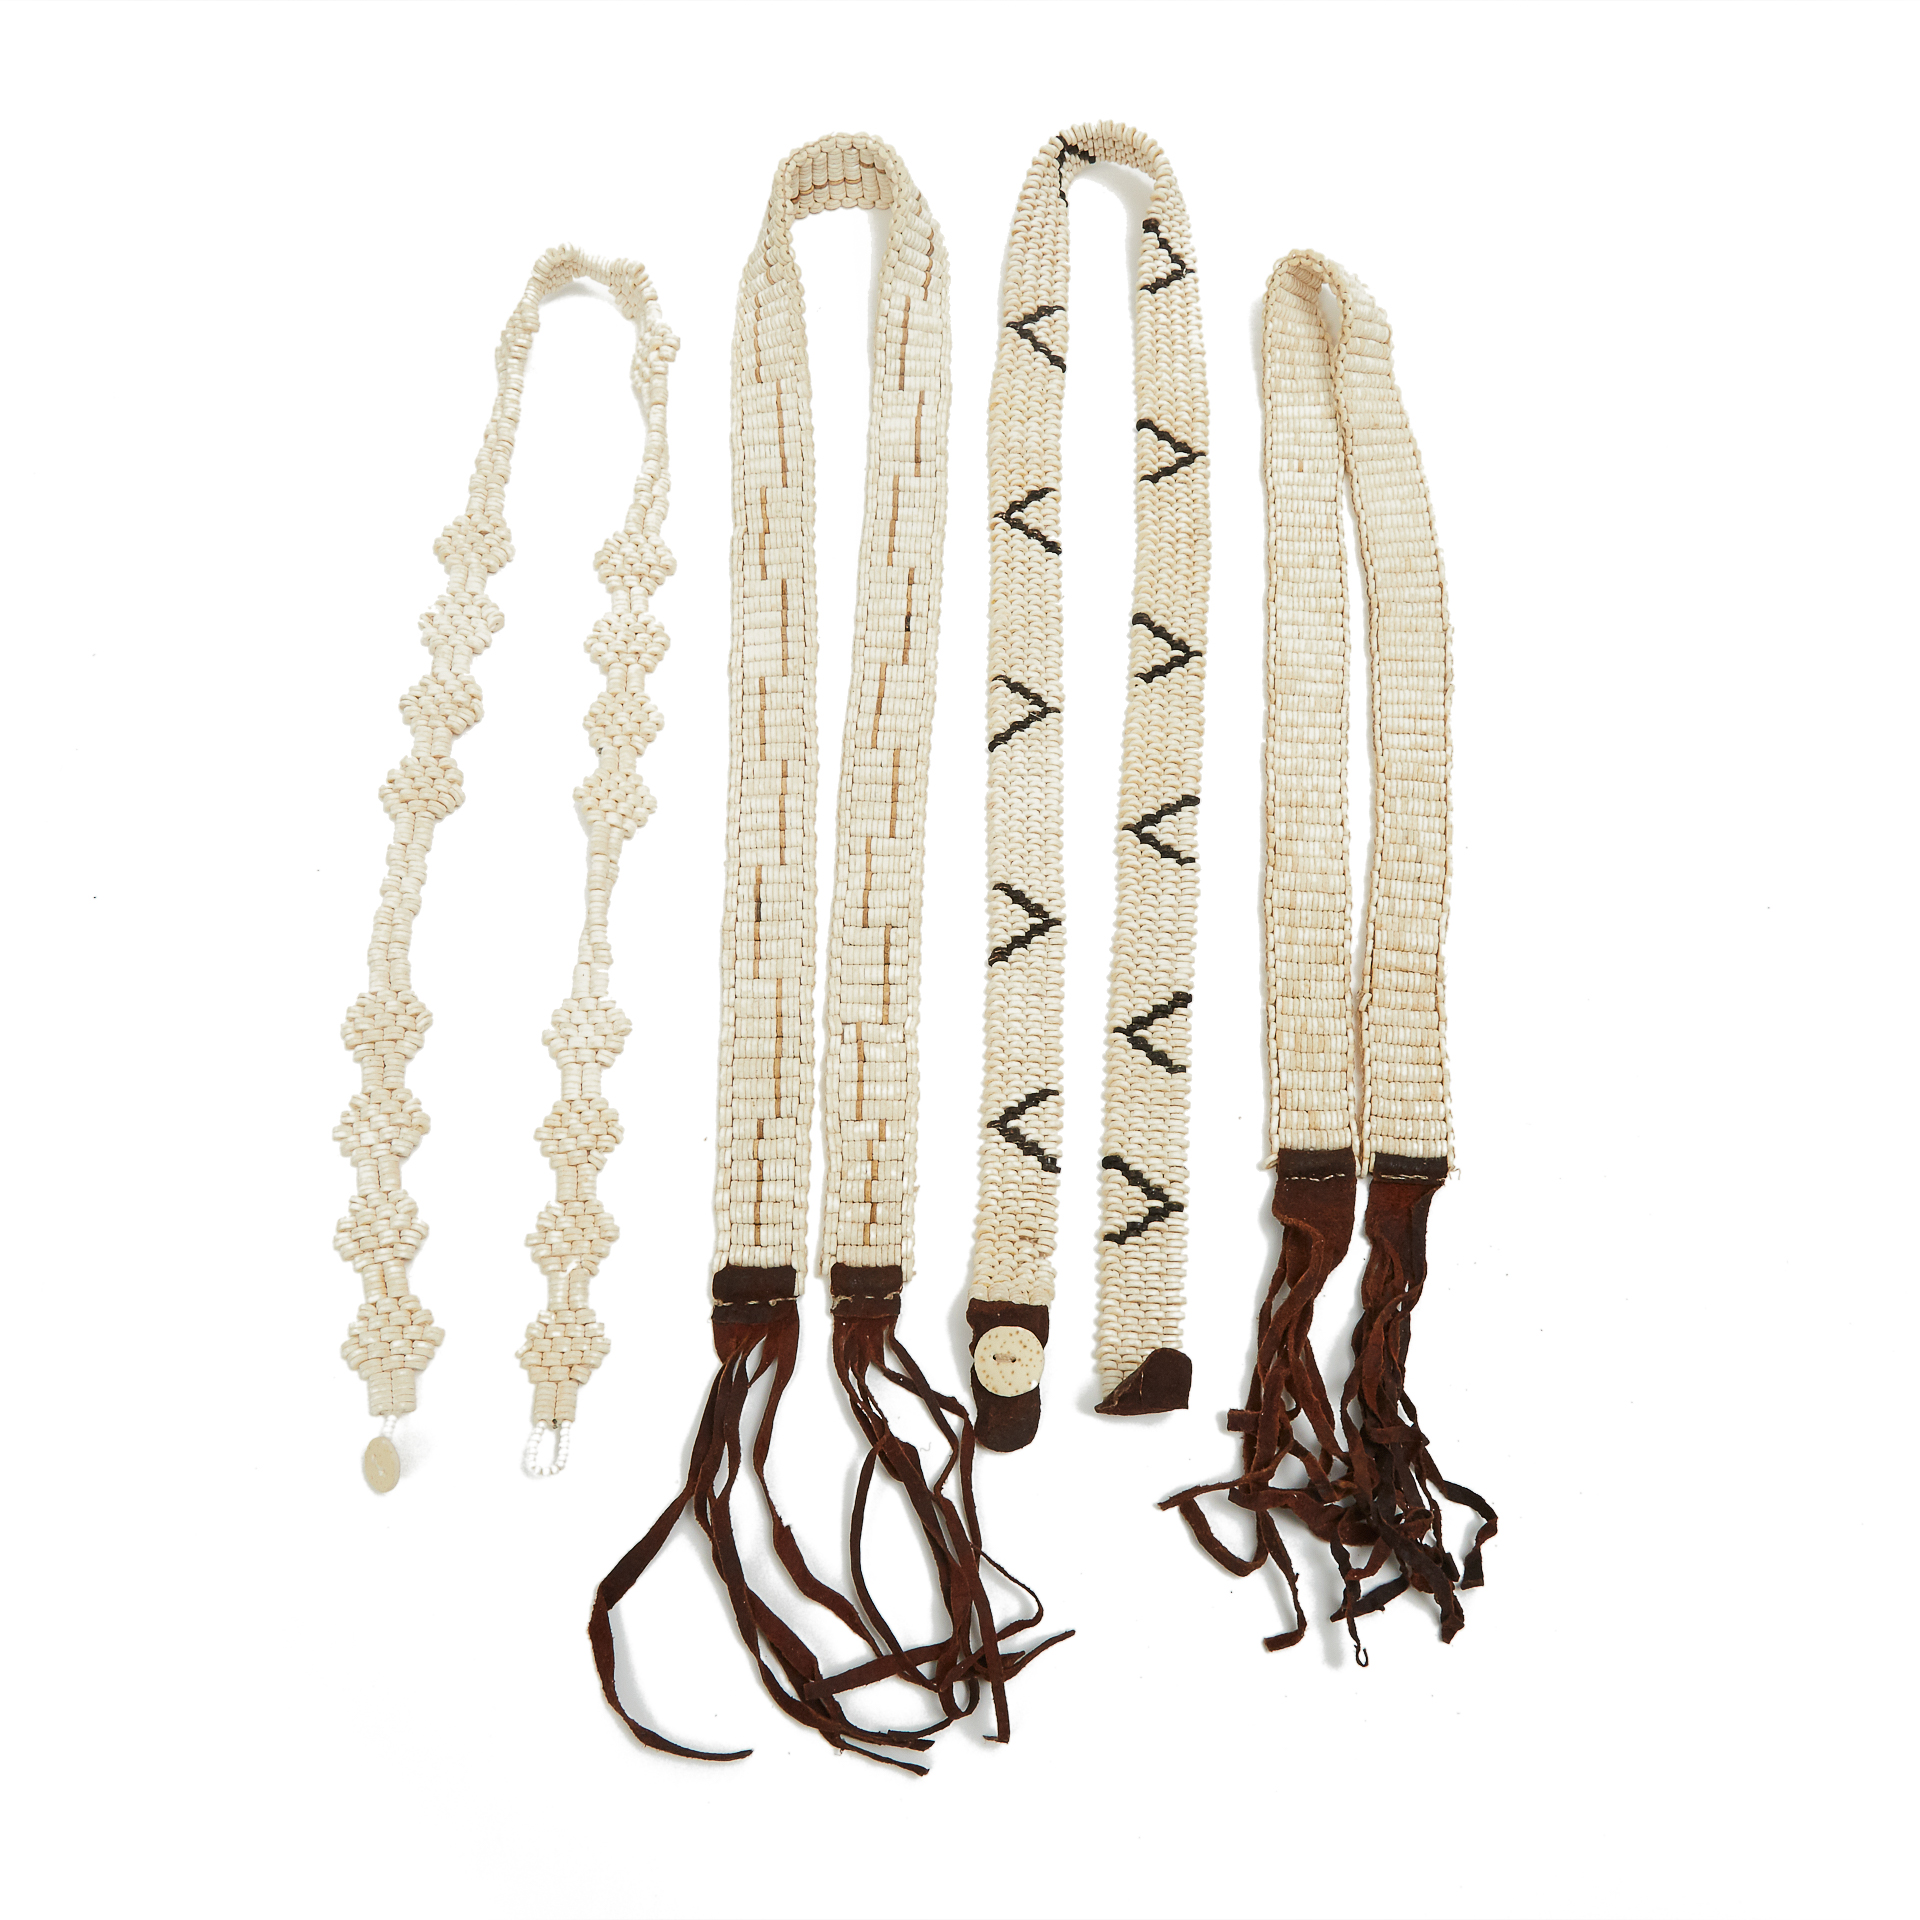 Group of Four Ostrich Eggshell Beadwork Belts, Botswana, Southern Africa